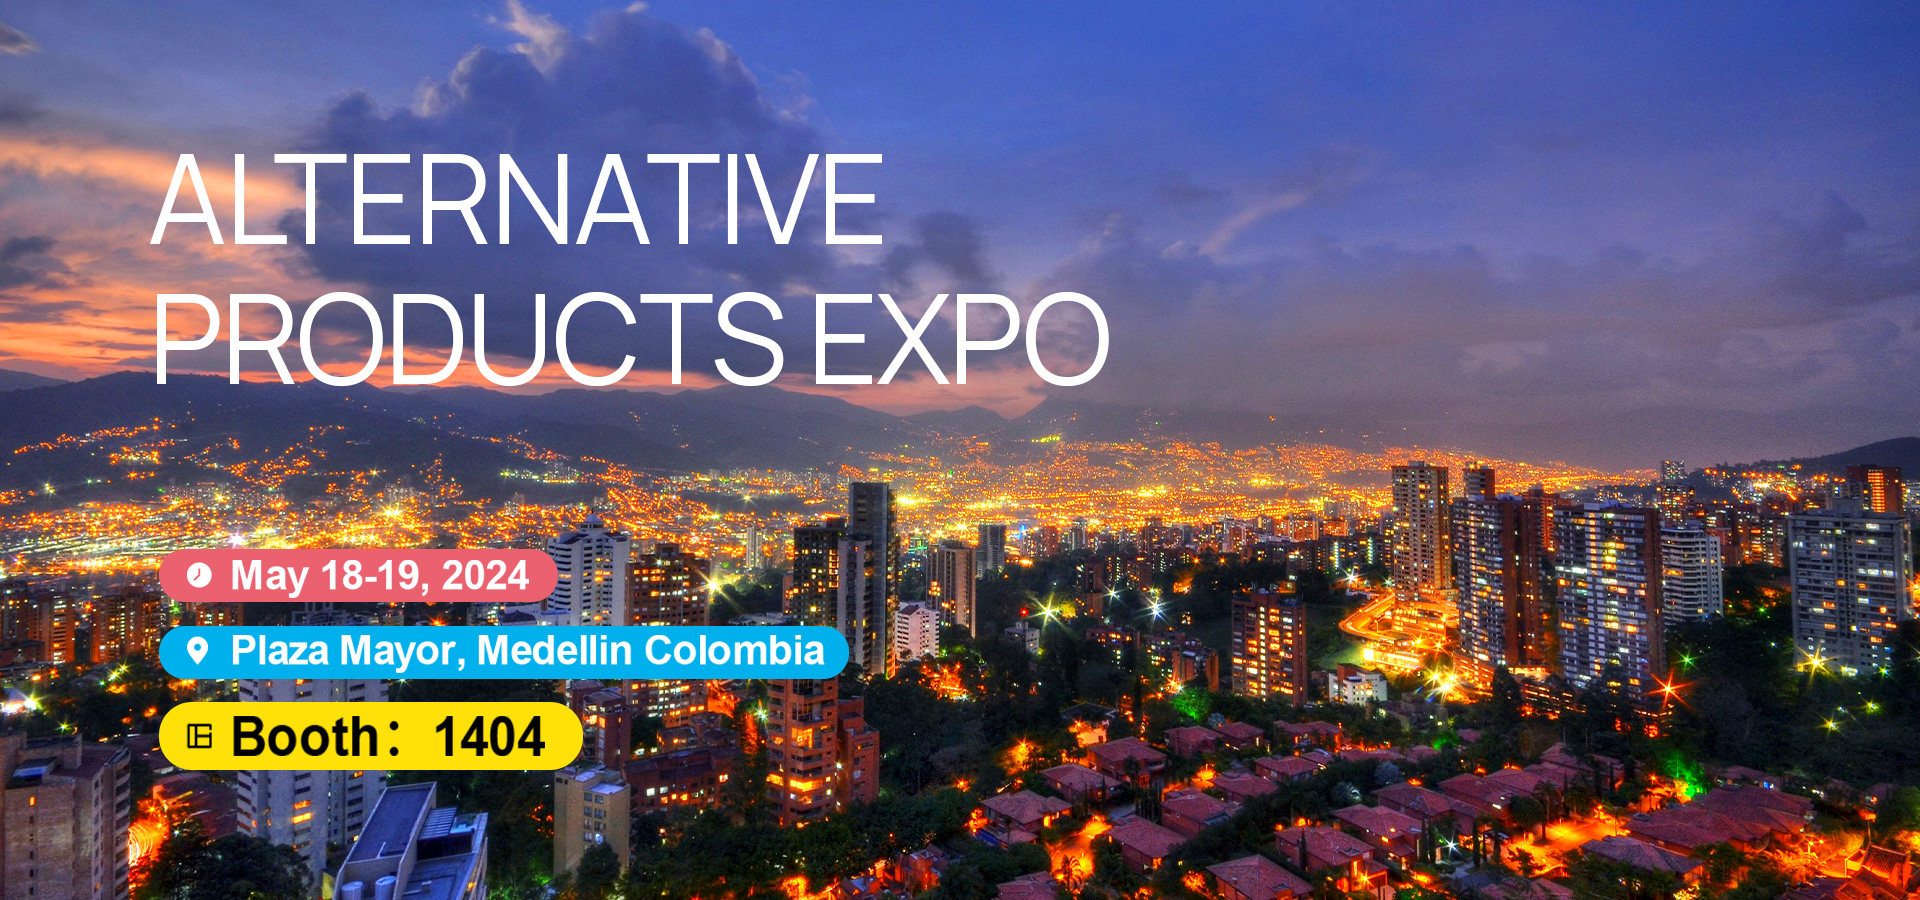 Shine in Colombia, meet DRAGBAR at ALTERNATIVE PRODUCTS EXPO 2024插图